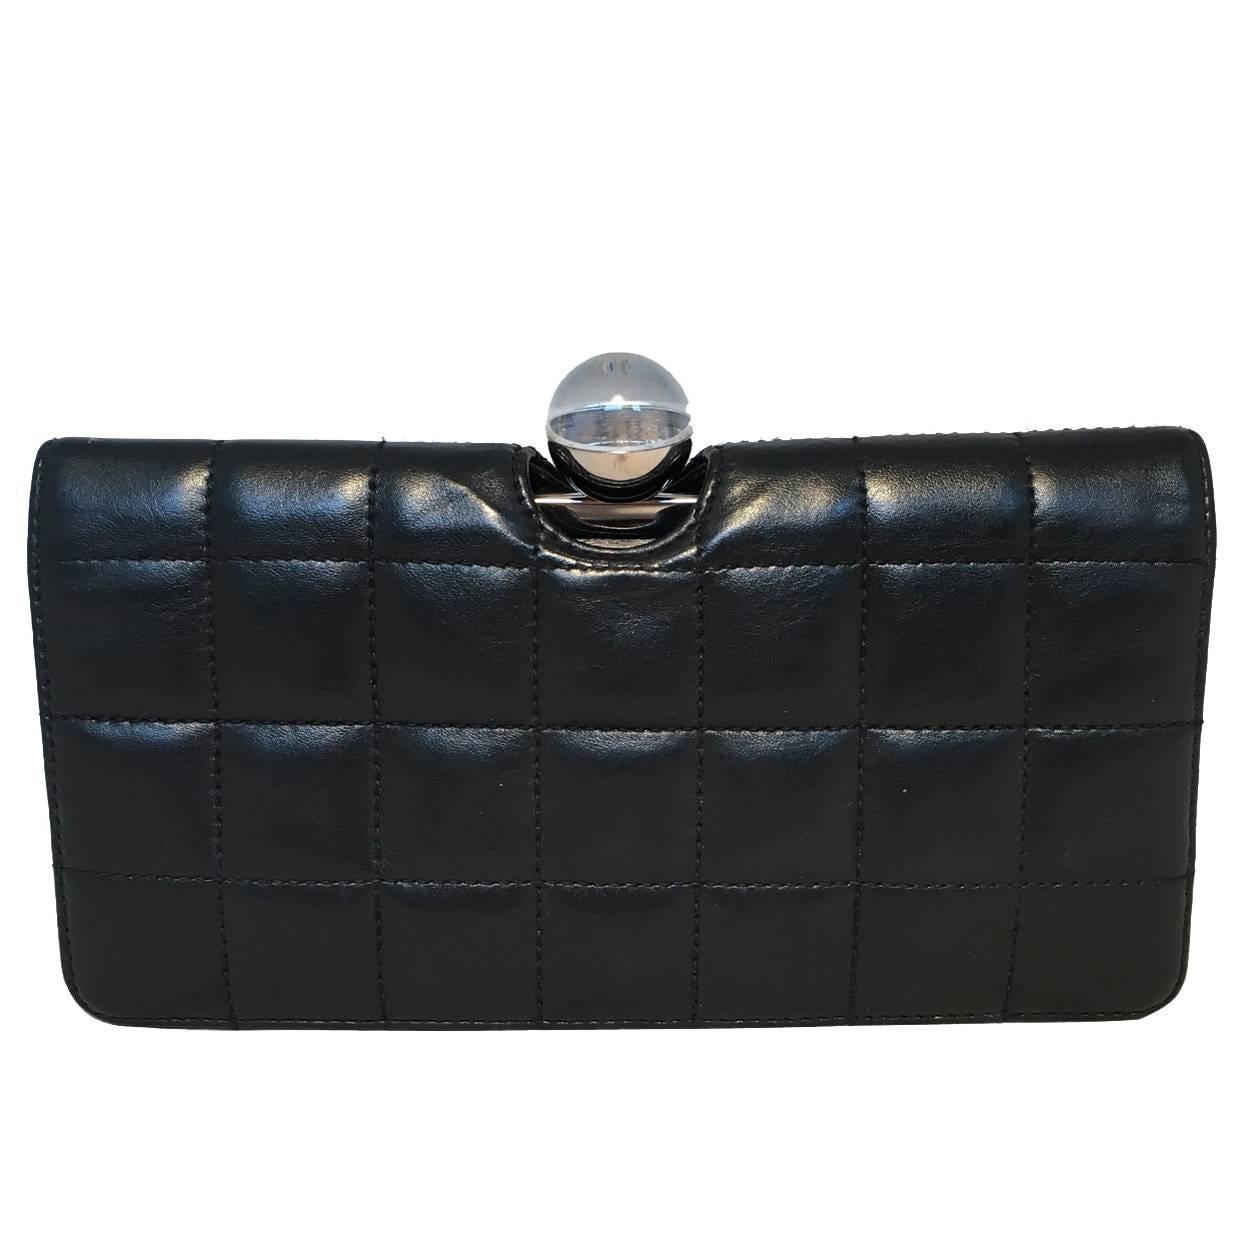 RARE Chanel Square Quilted Black Leather Crystal Ball Top Clutch